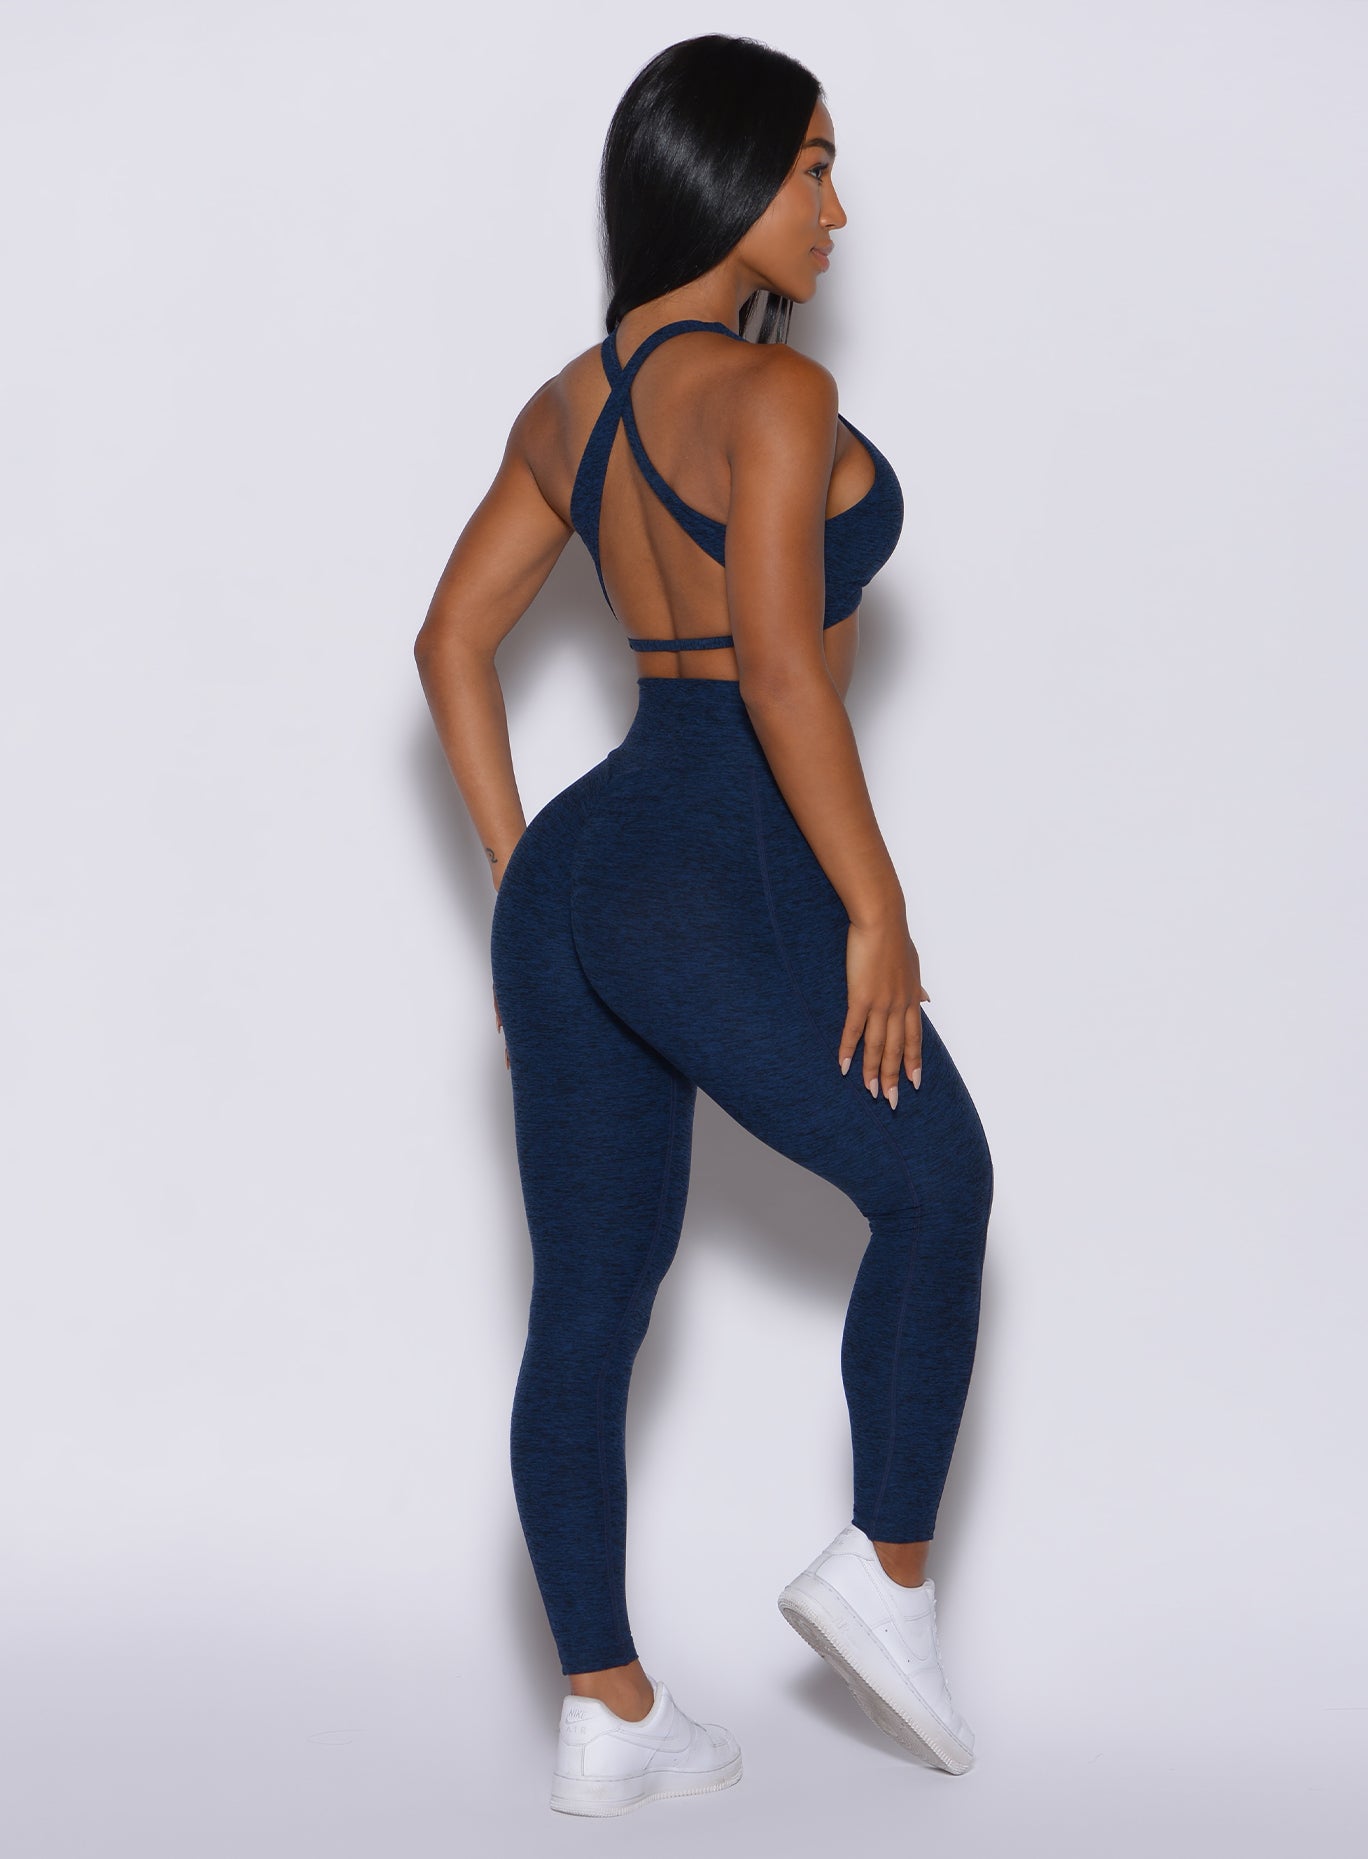 Back  profile view of a model in our Brazilian Contour Leggings in sapphire blue color and a matching sportsbra